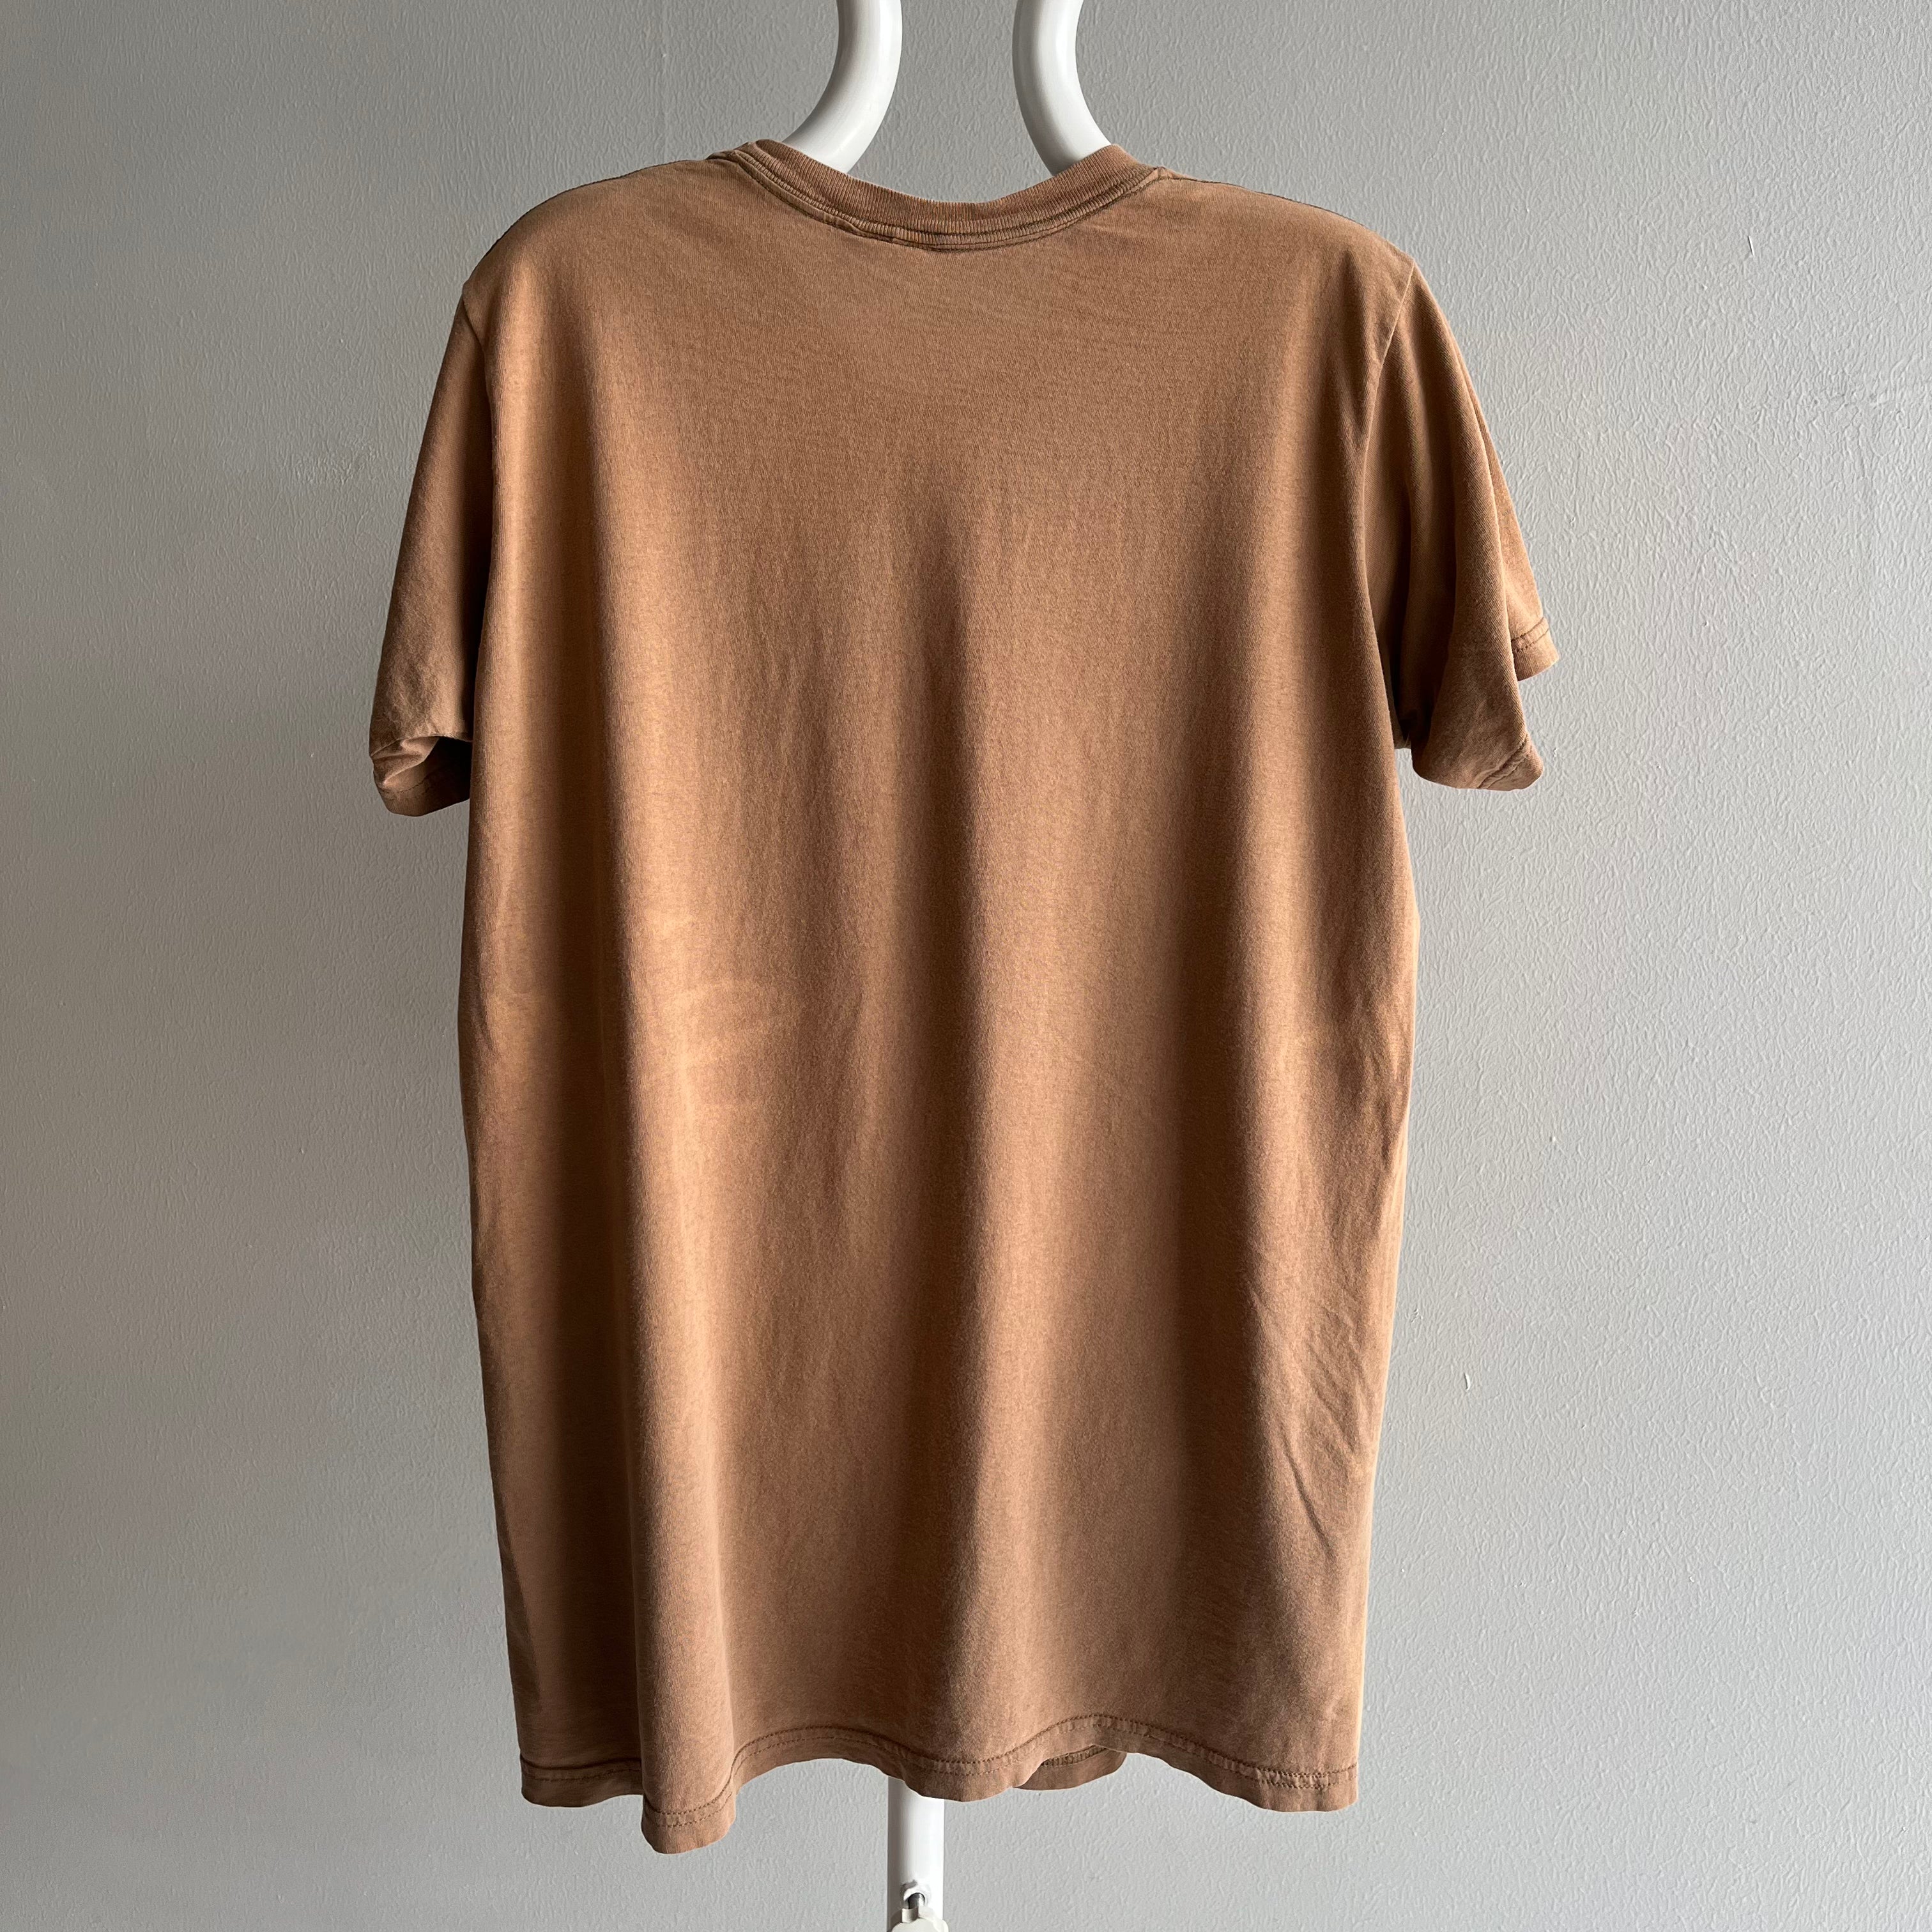 1980s Blank Faded Coffee Colored Blank Cotton T-Shirt